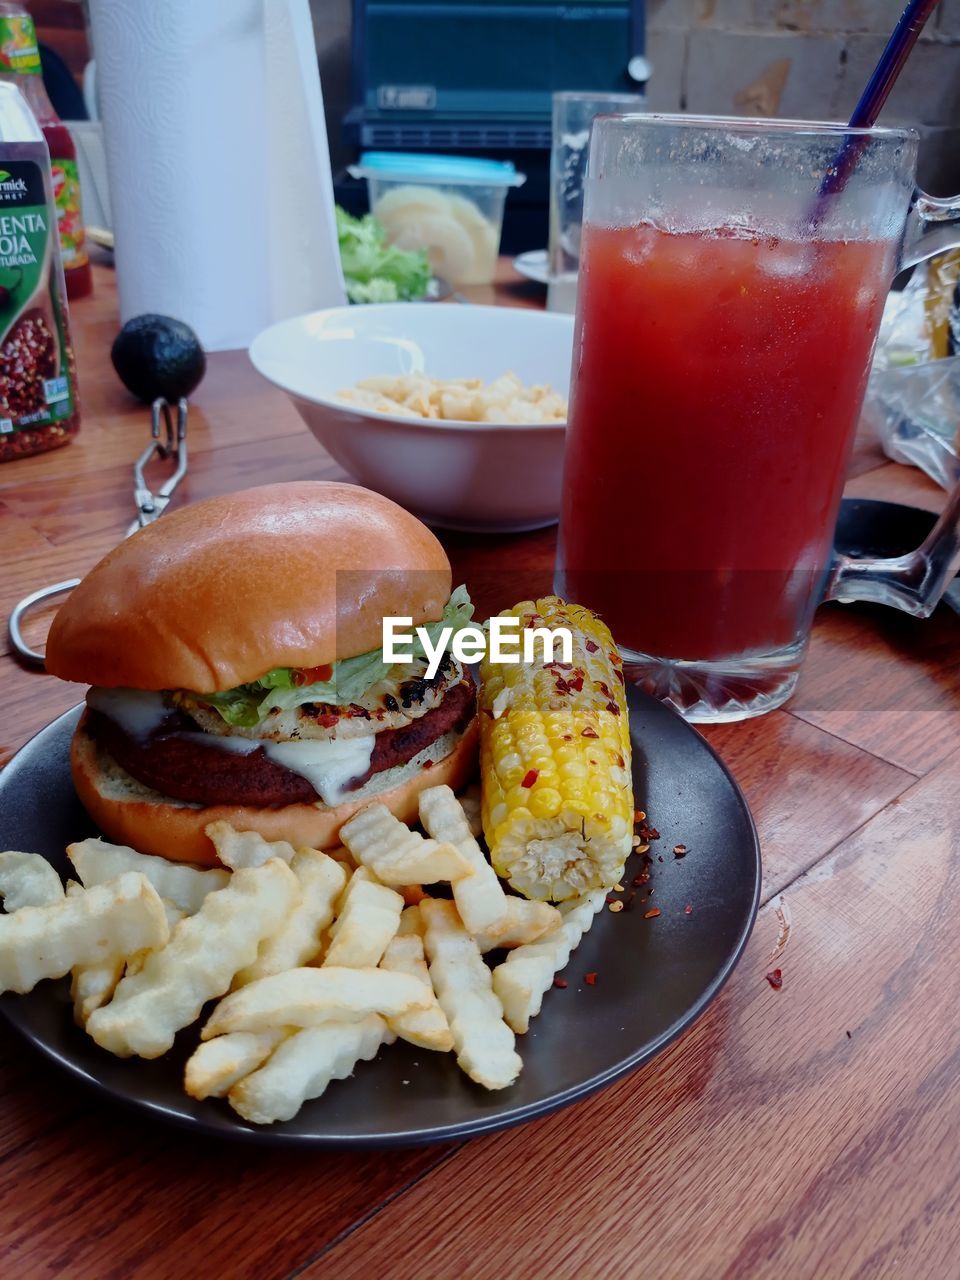 HIGH ANGLE VIEW OF BURGER AND VEGETABLES ON TABLE